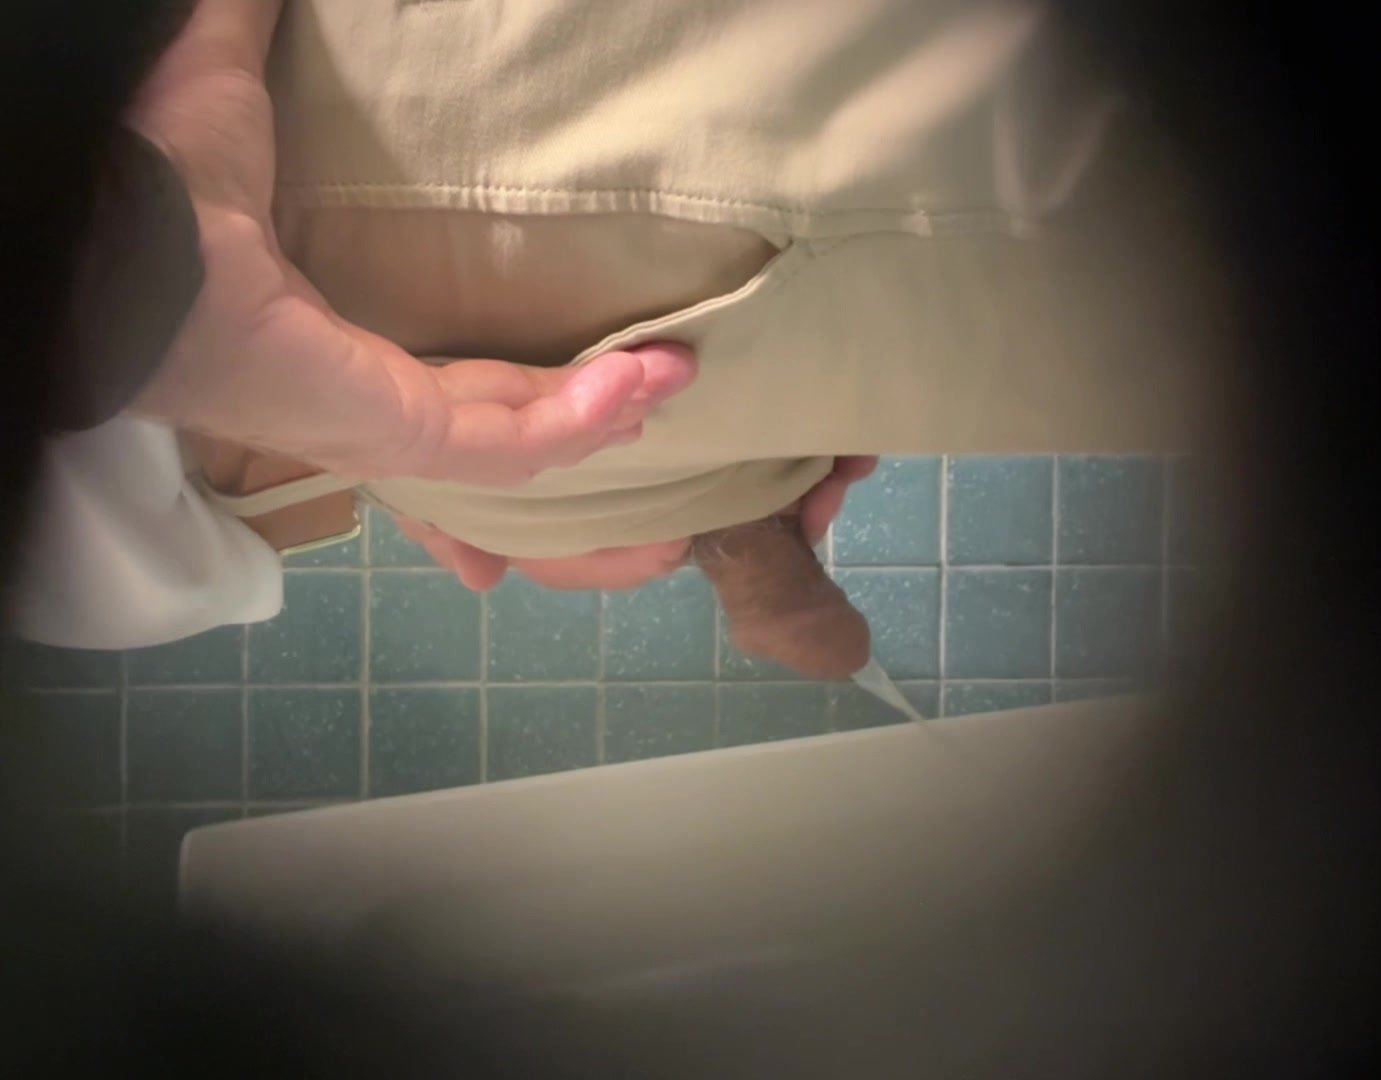 Pee and fart - video 8